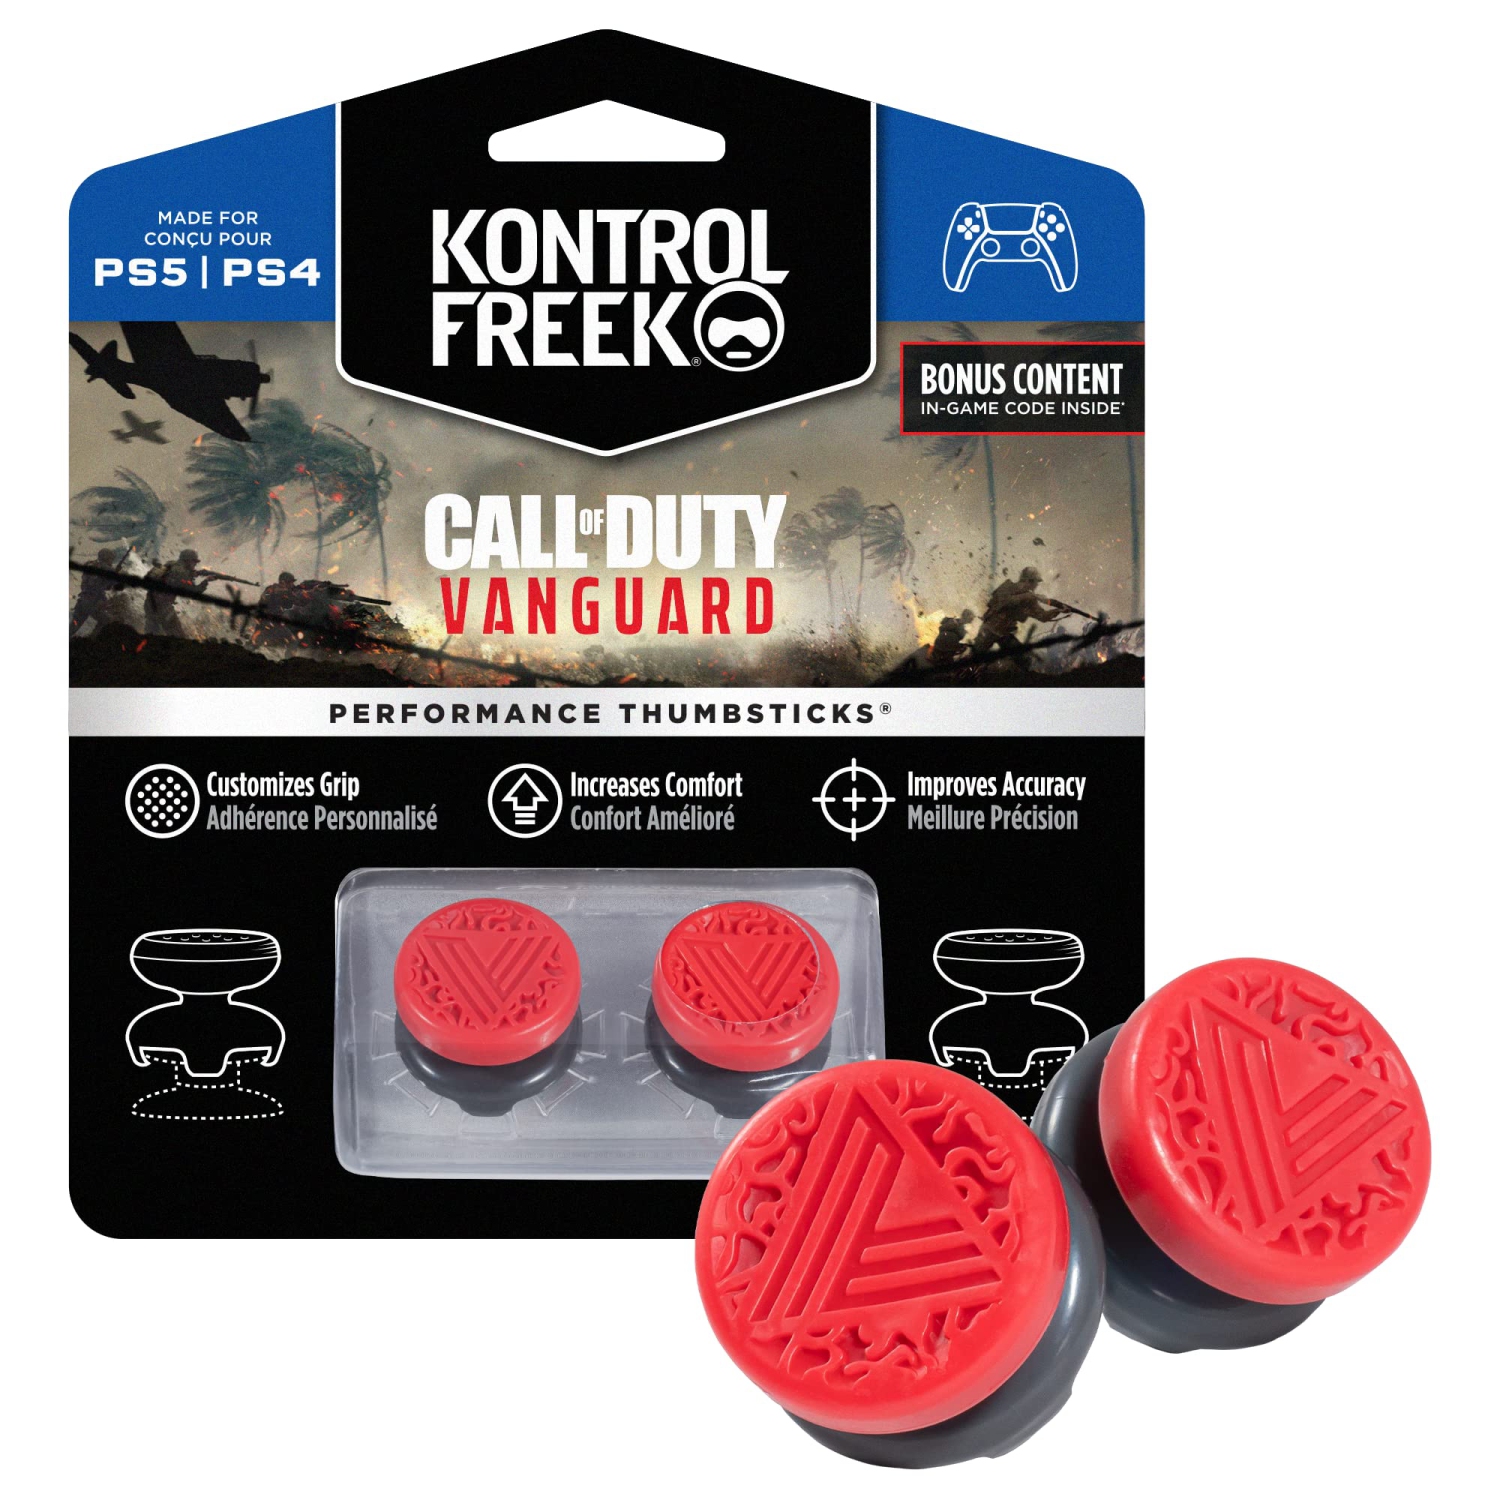 KontrolFreek Call of Duty: Vanguard Performance Thumbsticks for Playstation 4 (PS4) and Playstation 5 (PS5) | 2 High-Rise, H